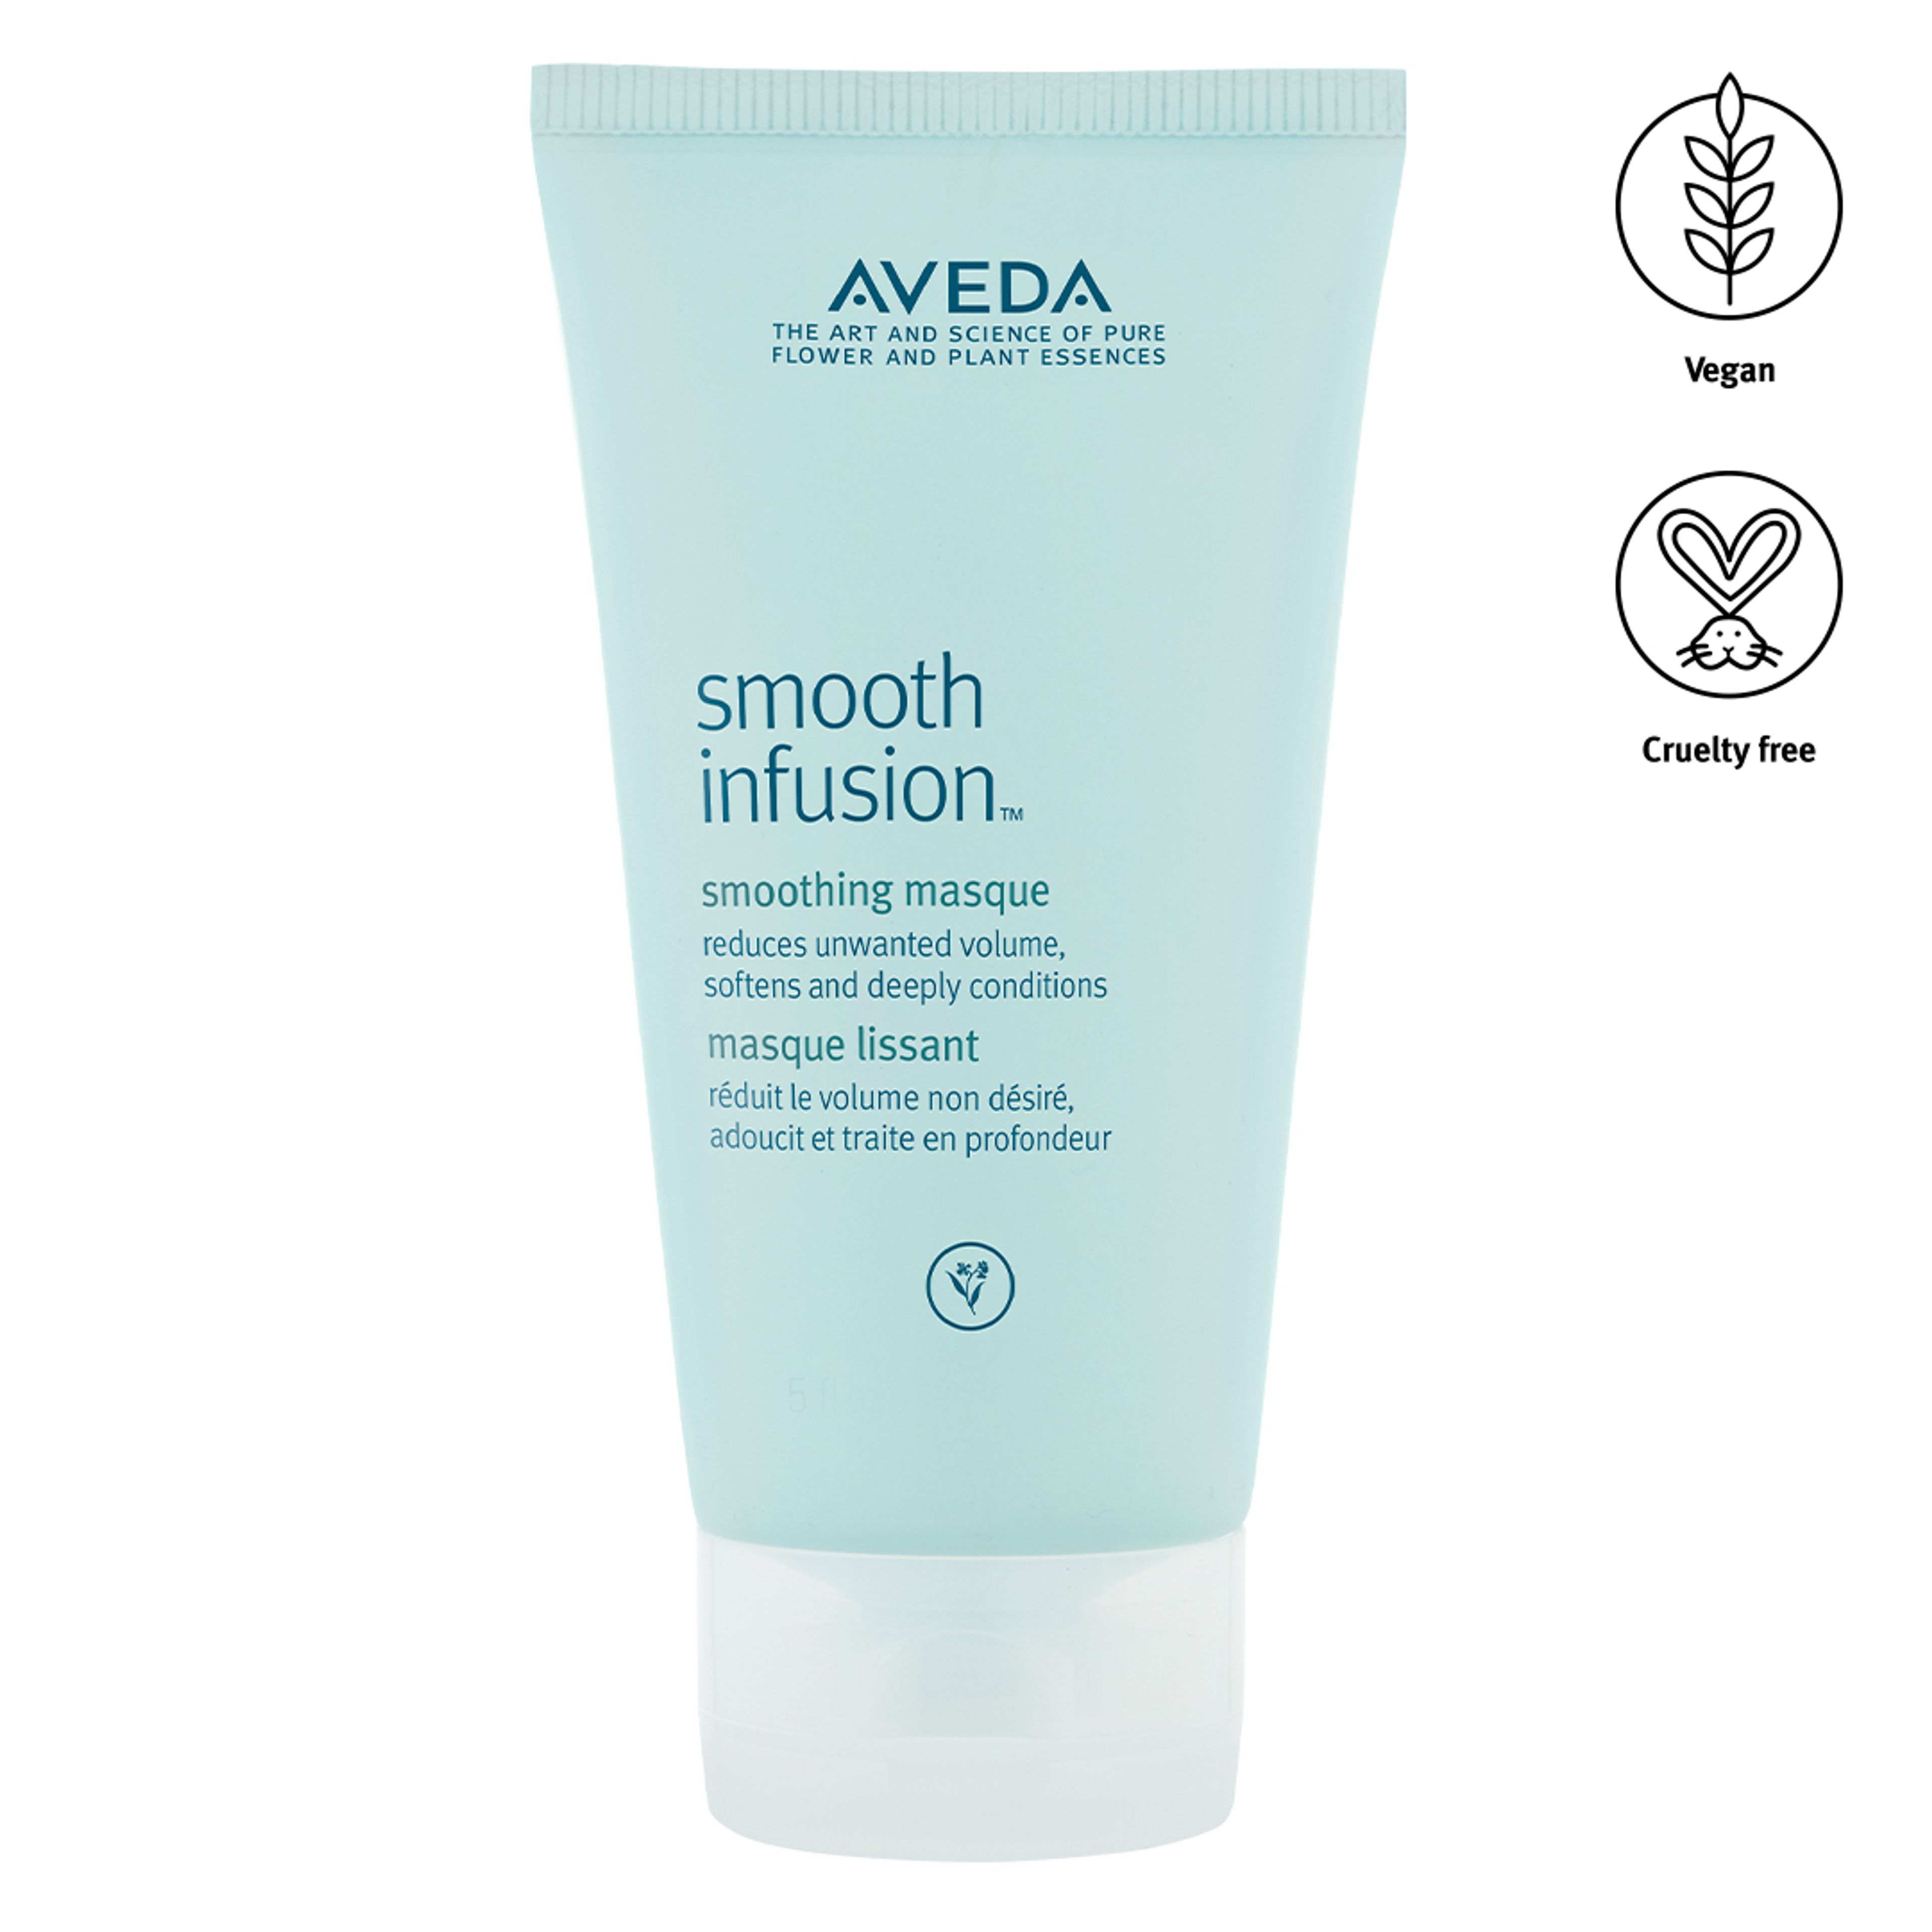 Aveda Smooth Infusion Masque 1